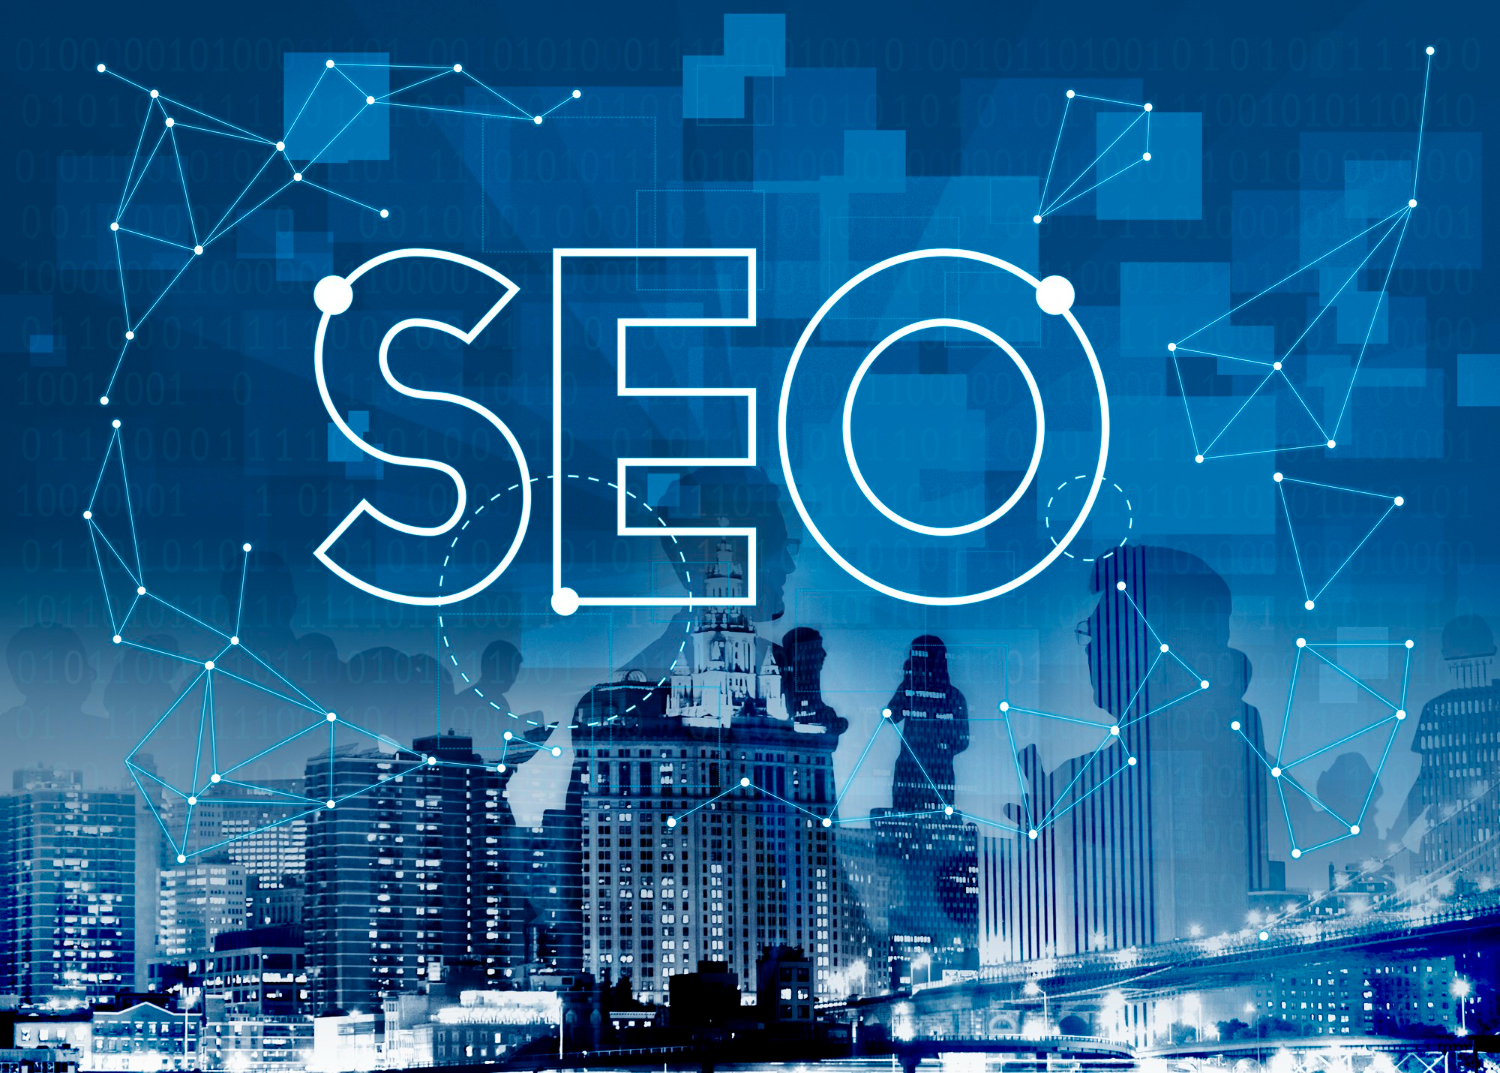 SEO For Business